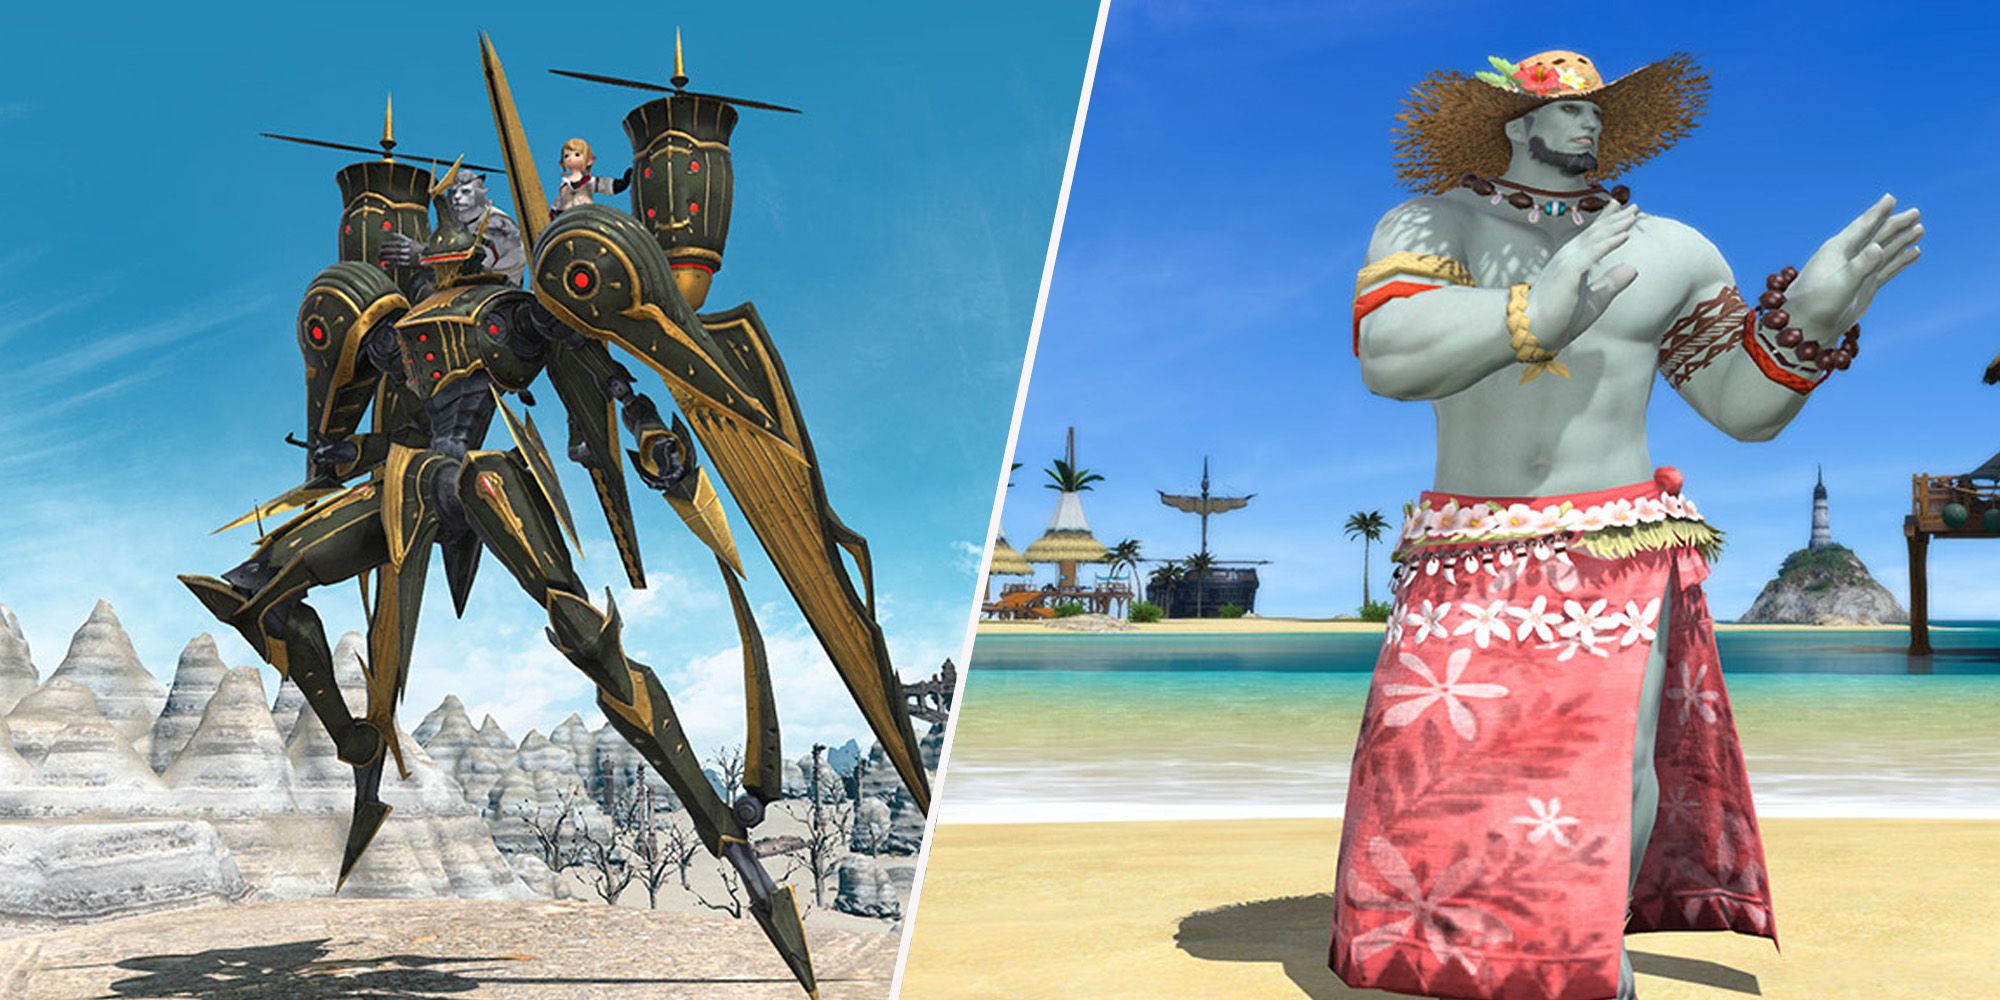 Final Fantasy 14 Cruise Chaser Mount and Flame Dance emote